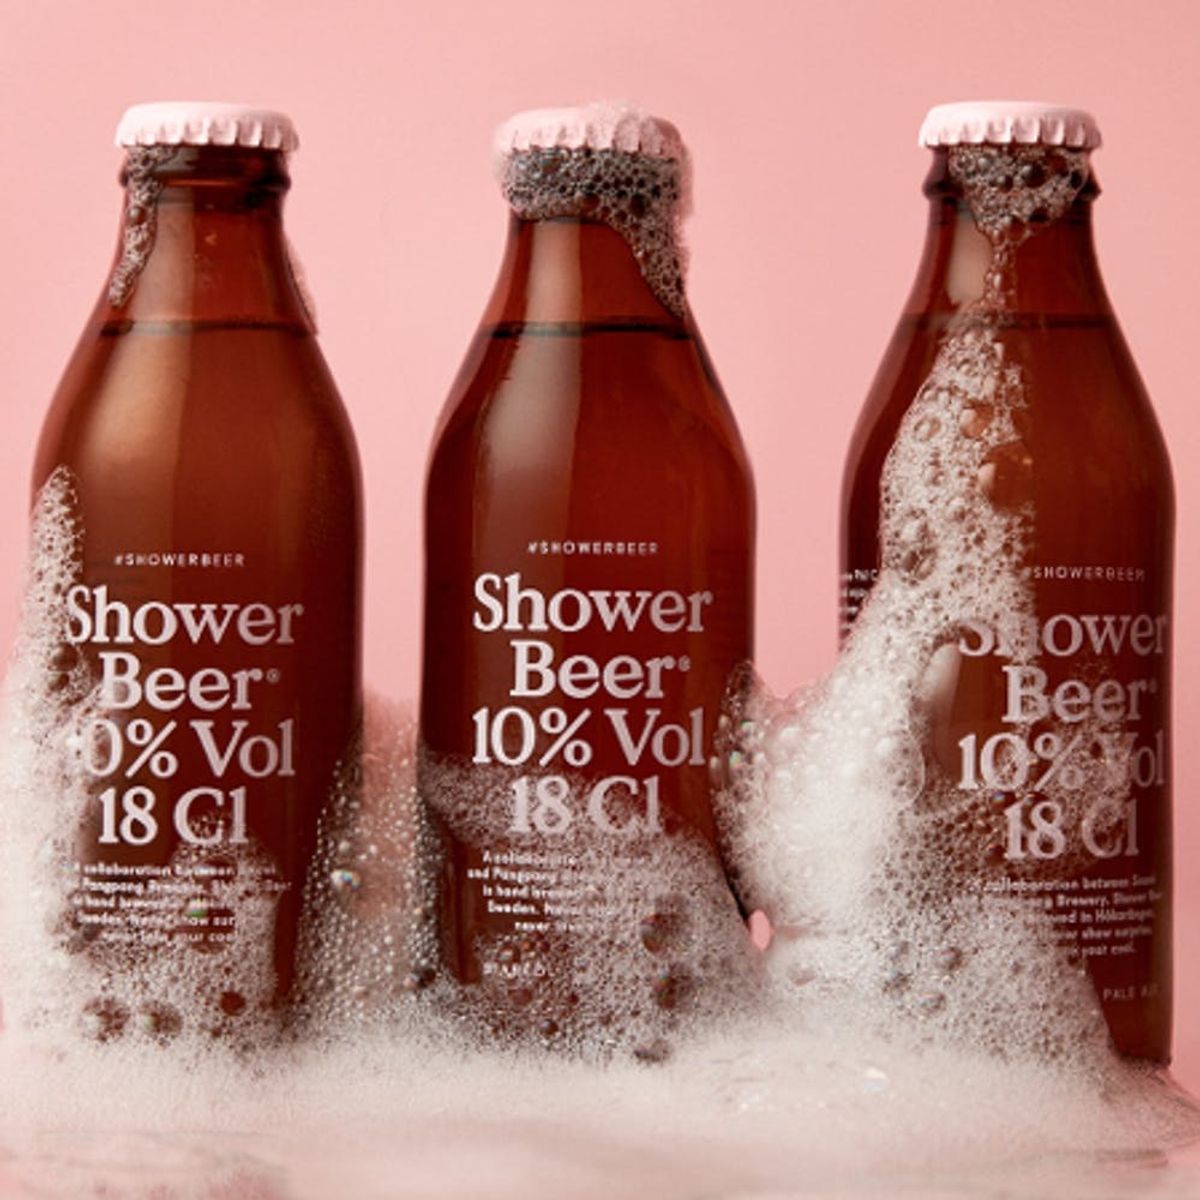 Shower Beer Is Made Specifically for Drinking While Bathing